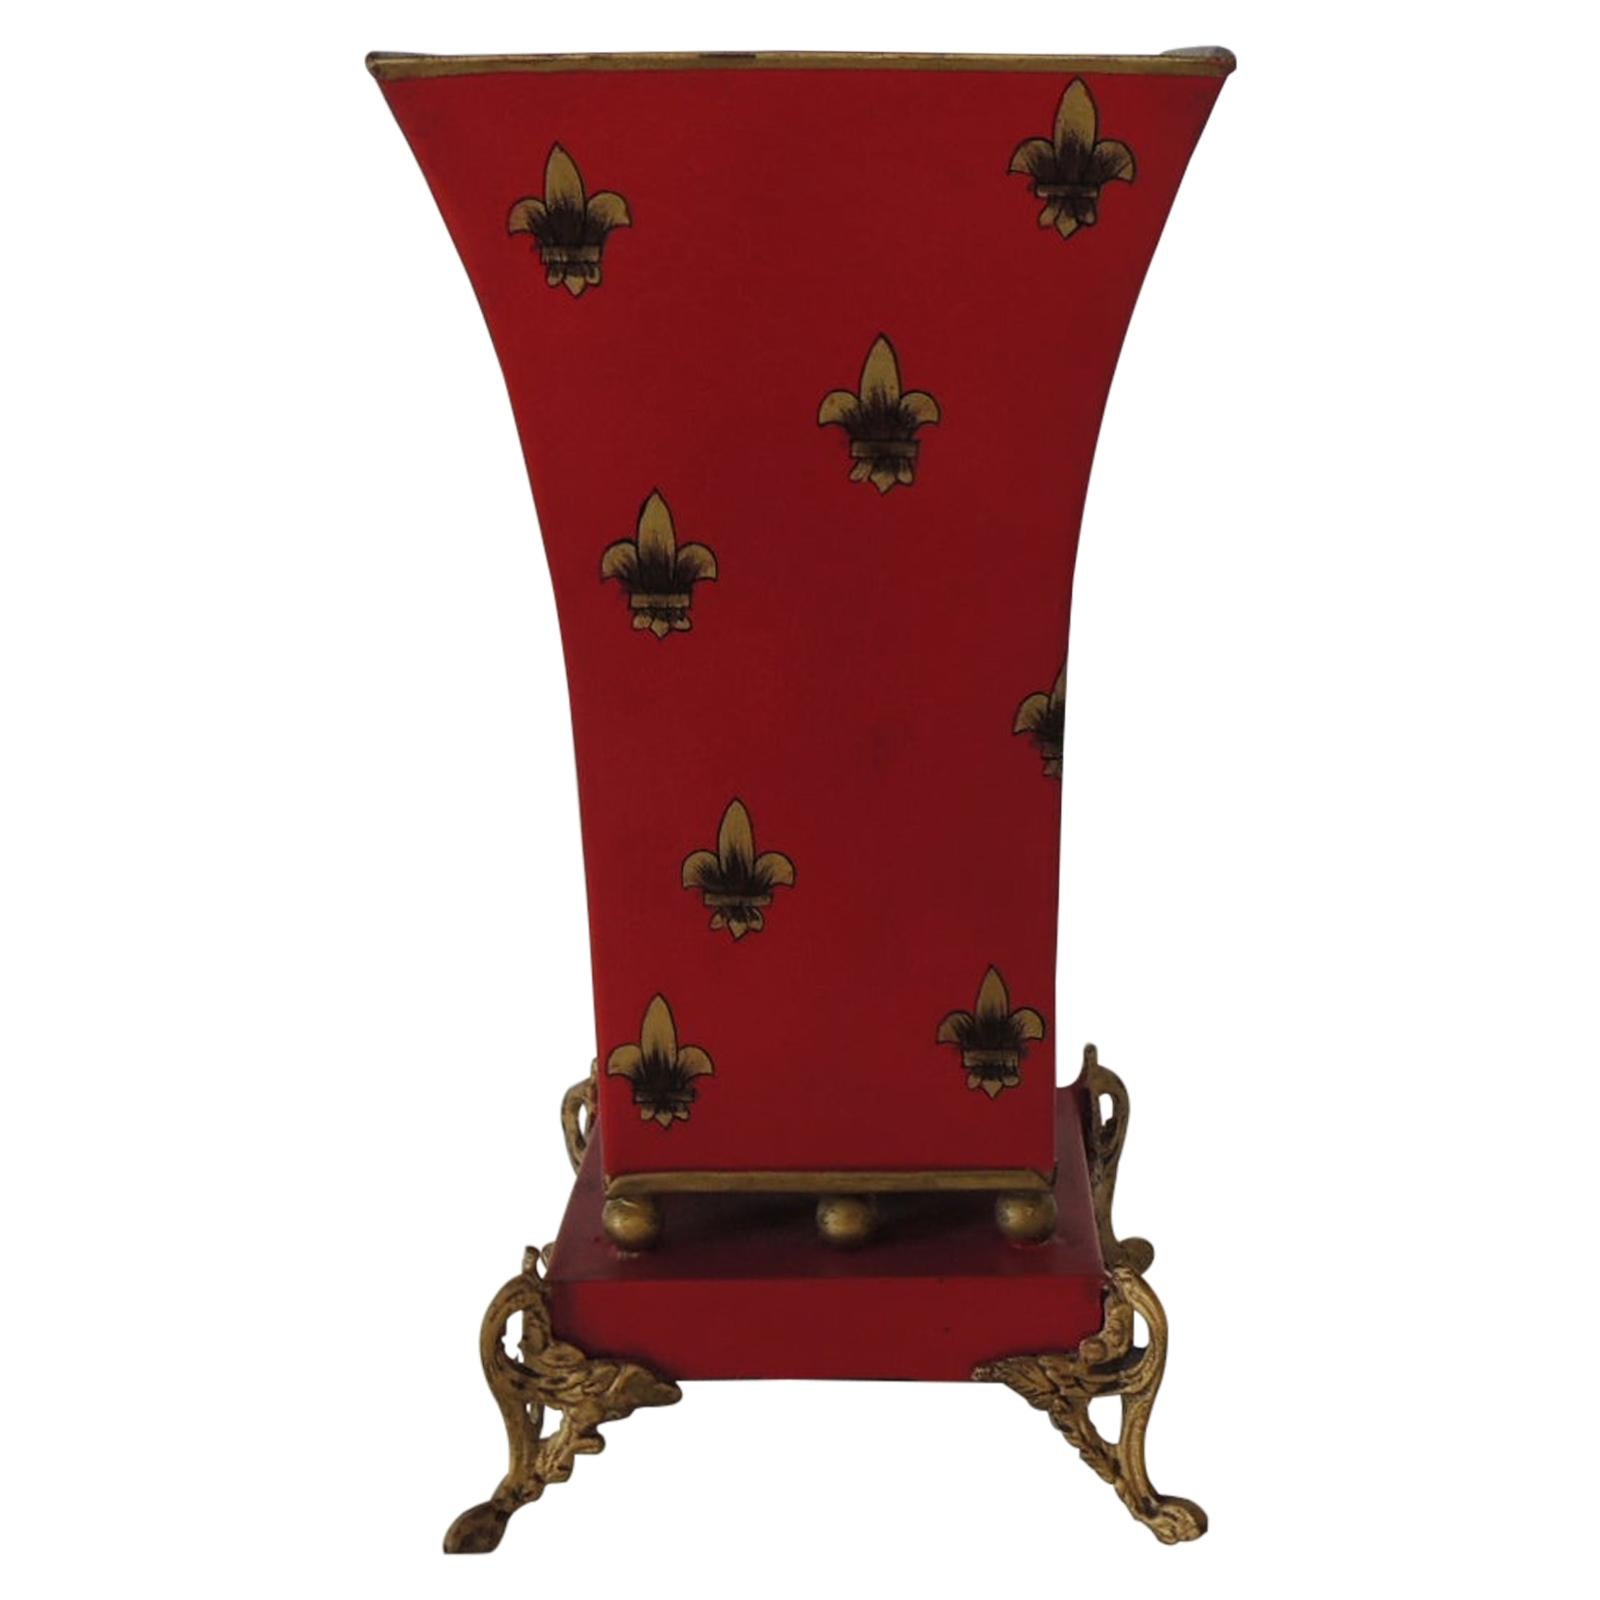 Red and Gold Tall Cachepot with Fleur-de-Lis Design